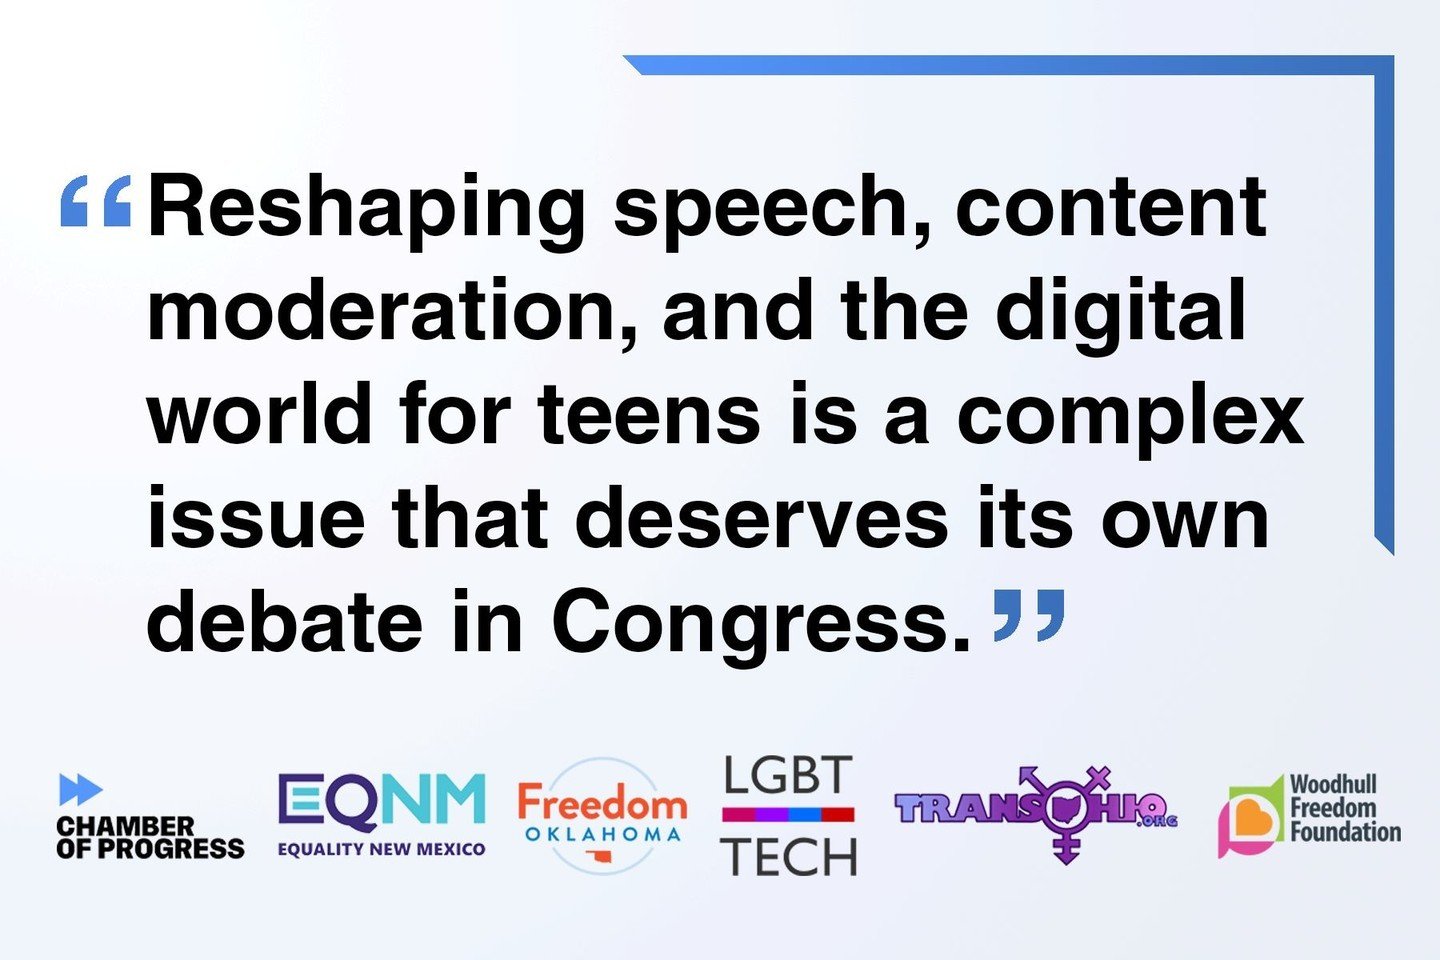 We've seen Oklahoma join the ranks of states trying to censor access to 2SLGBTQ+ representation on the Internet under the guise of child safety. That's why we joined Chamber of Progress, Equality New Mexico, LGBT Tech, TransOhio, and the Woodhull Fre